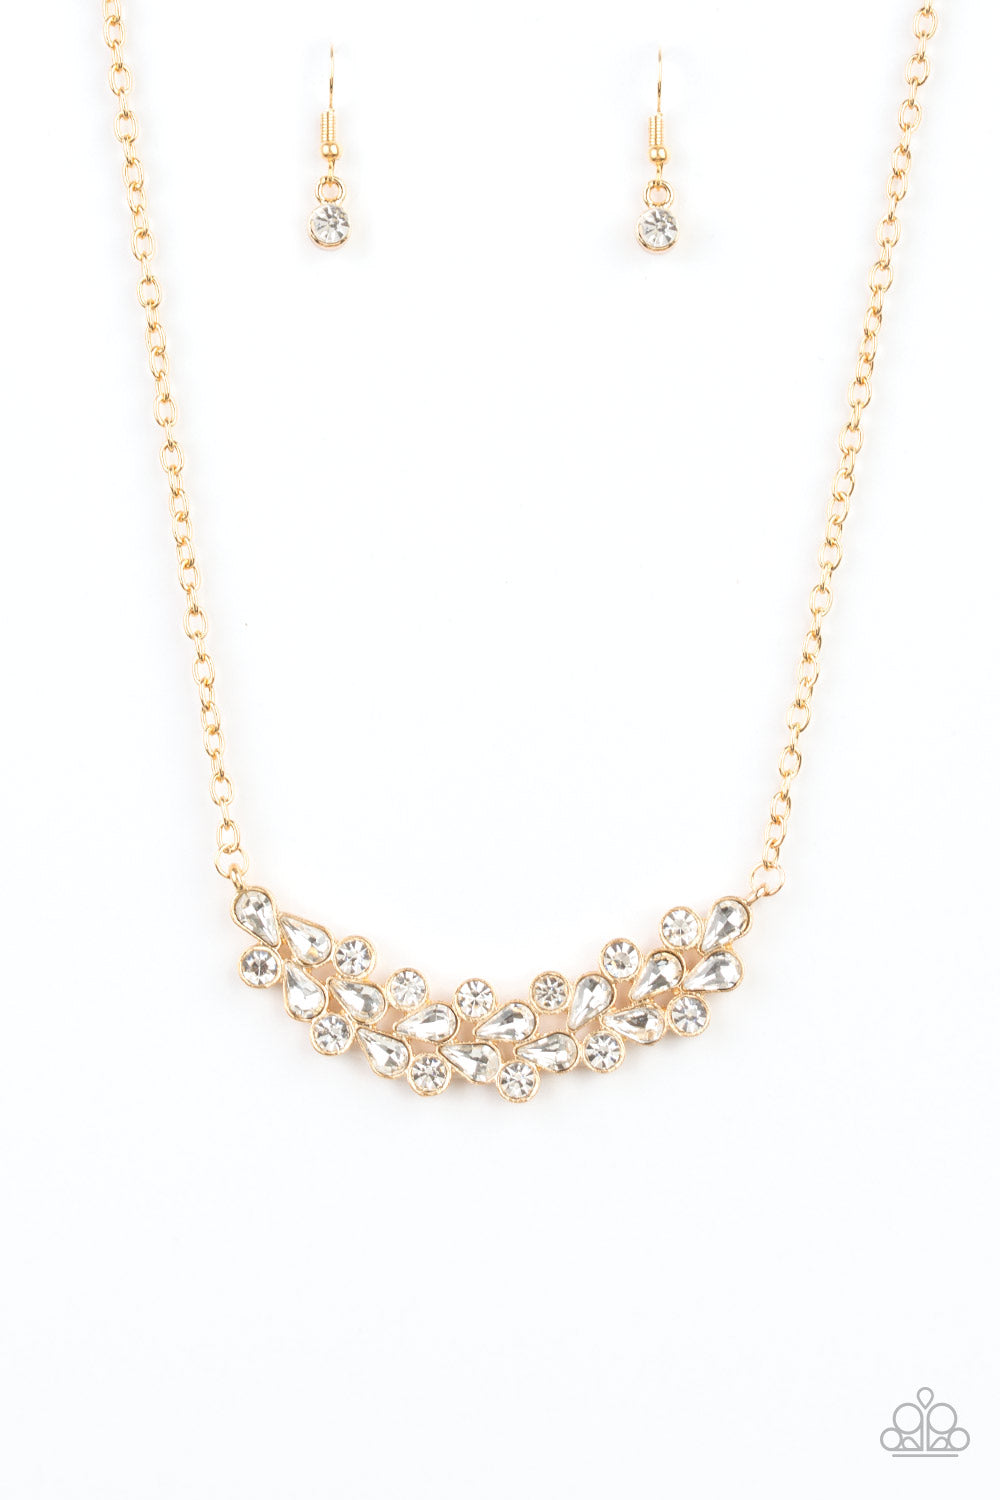 Find Joy - Gold Necklace - Paparazzi Accessories – Five Dollar Jewelry Shop